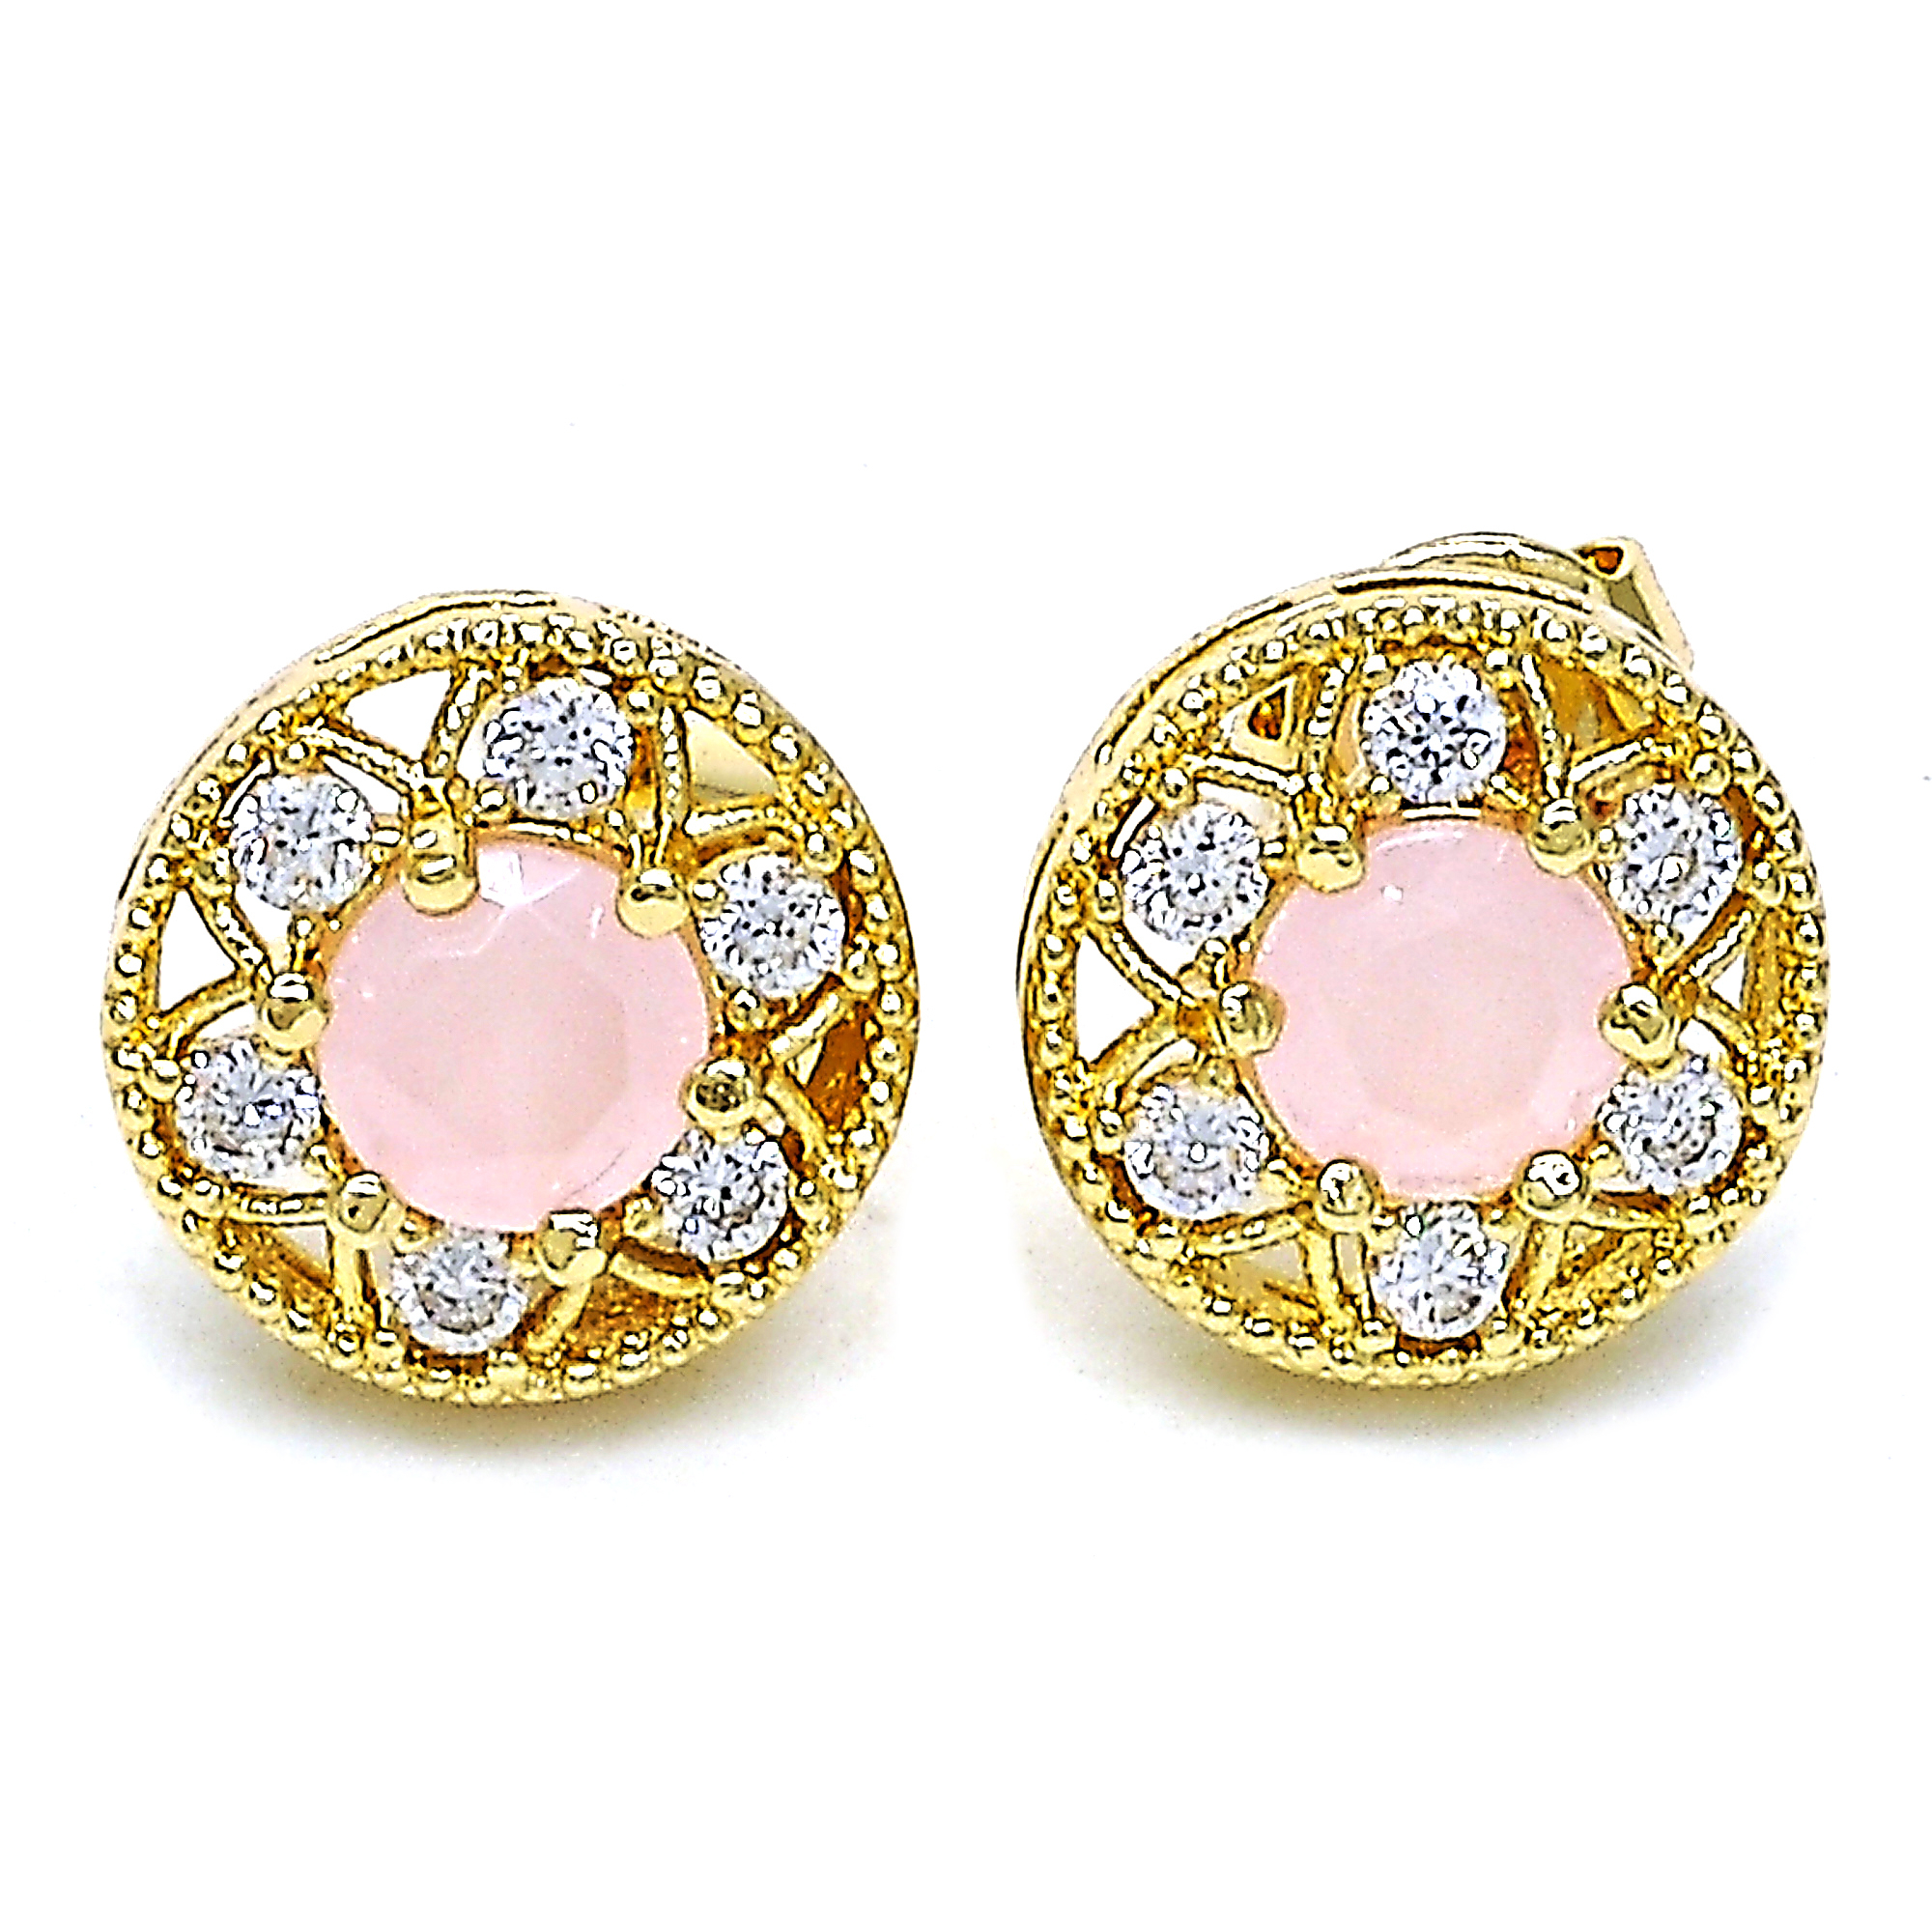 Gold Filled High Polish Finsh Stud Earring, Flower Design, With Opal And Cubic Zirconia, Golden Tone